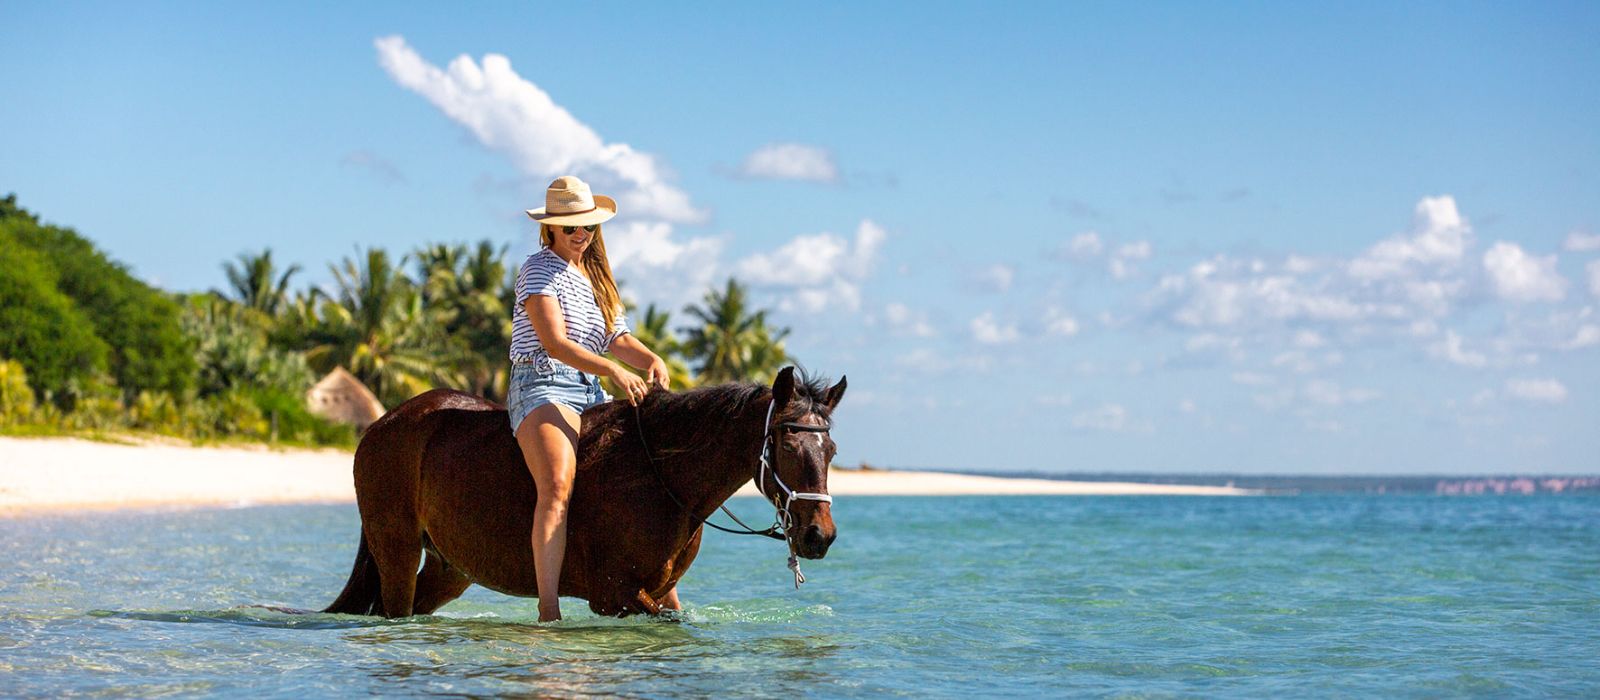 Best Beaches in Africa for Swimming With Horses